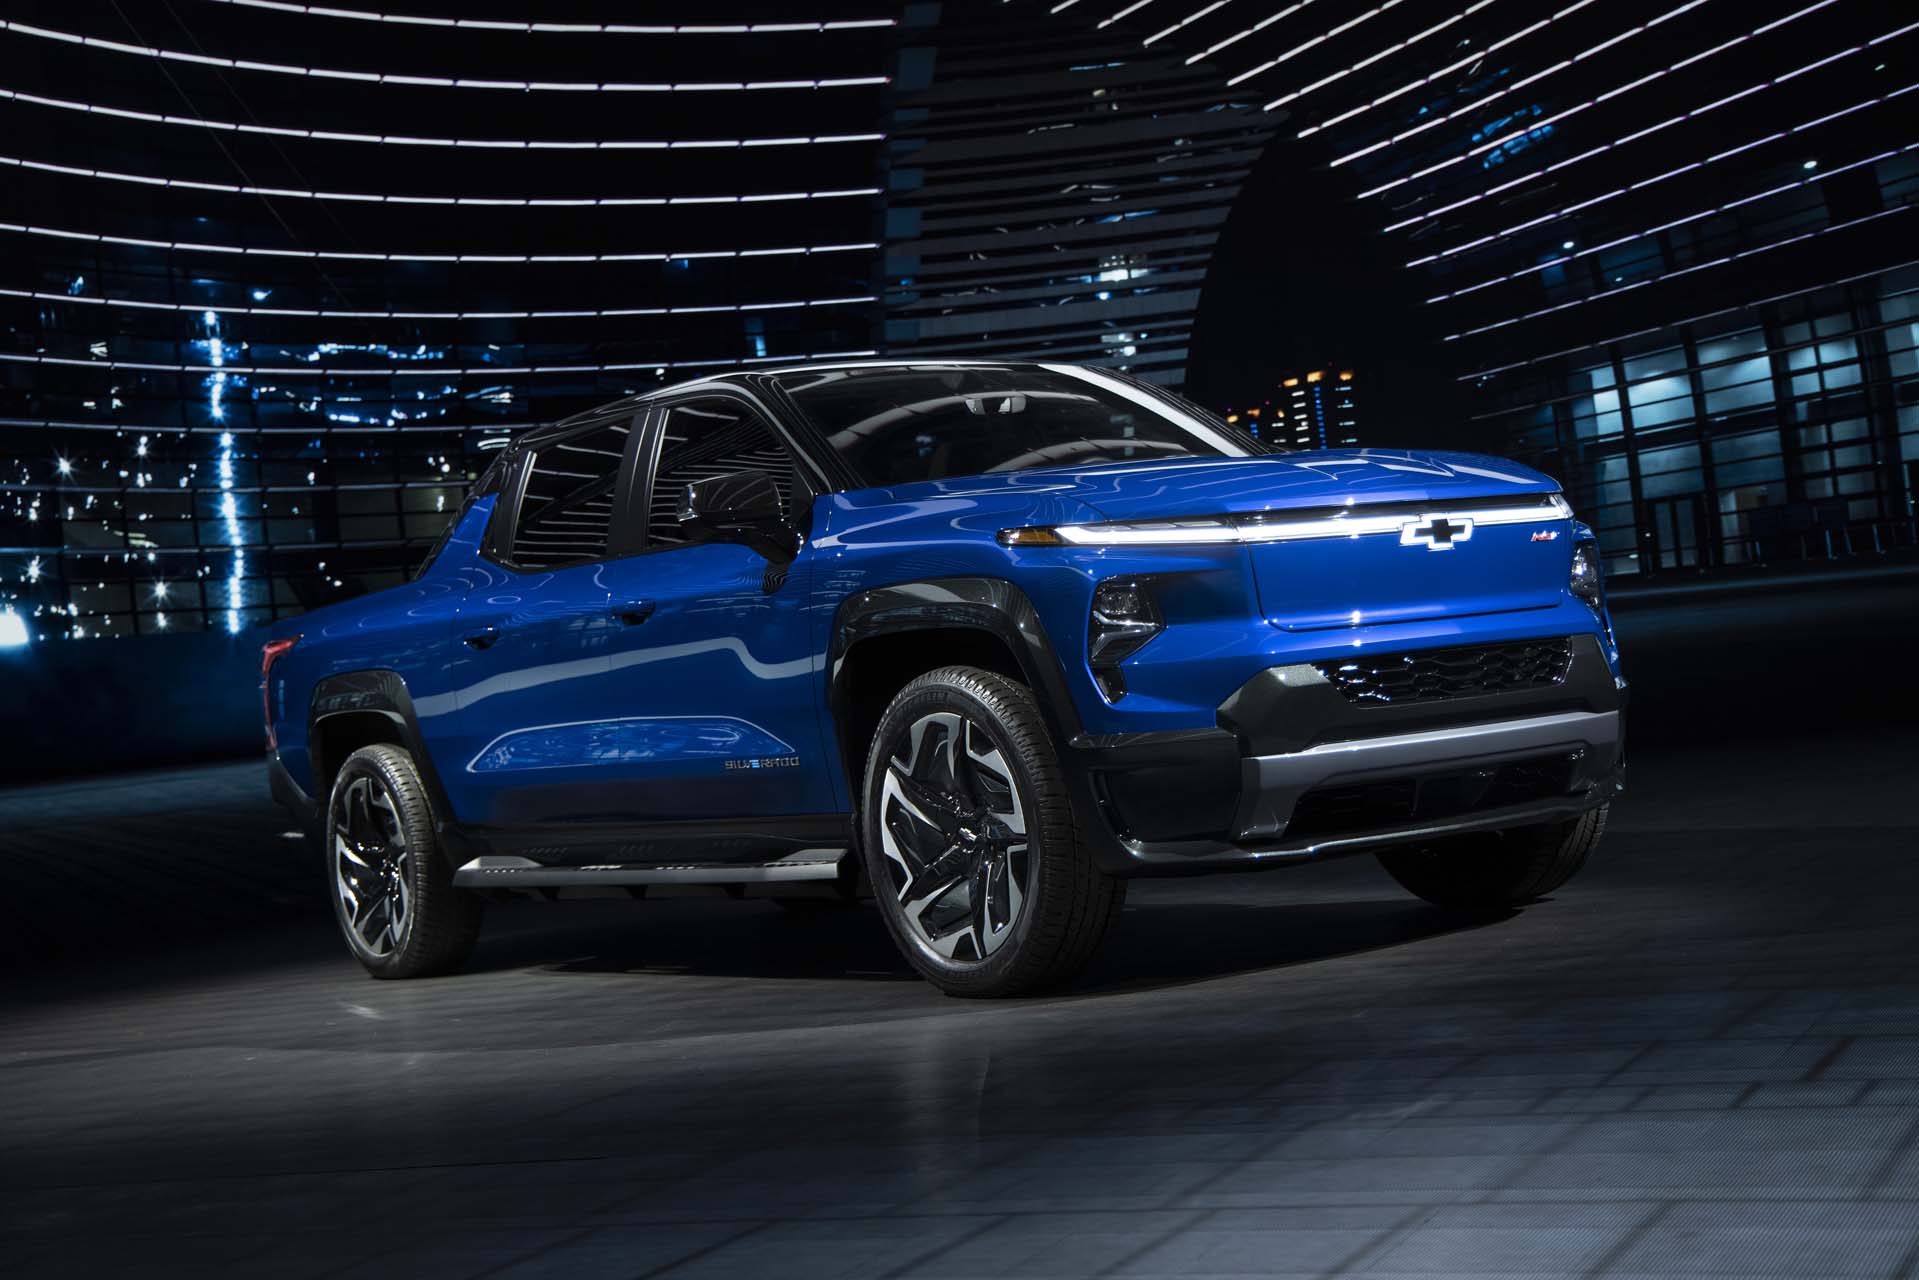 GM's Orion plant to build Chevy Silverado and GMC Sierra electric pickups